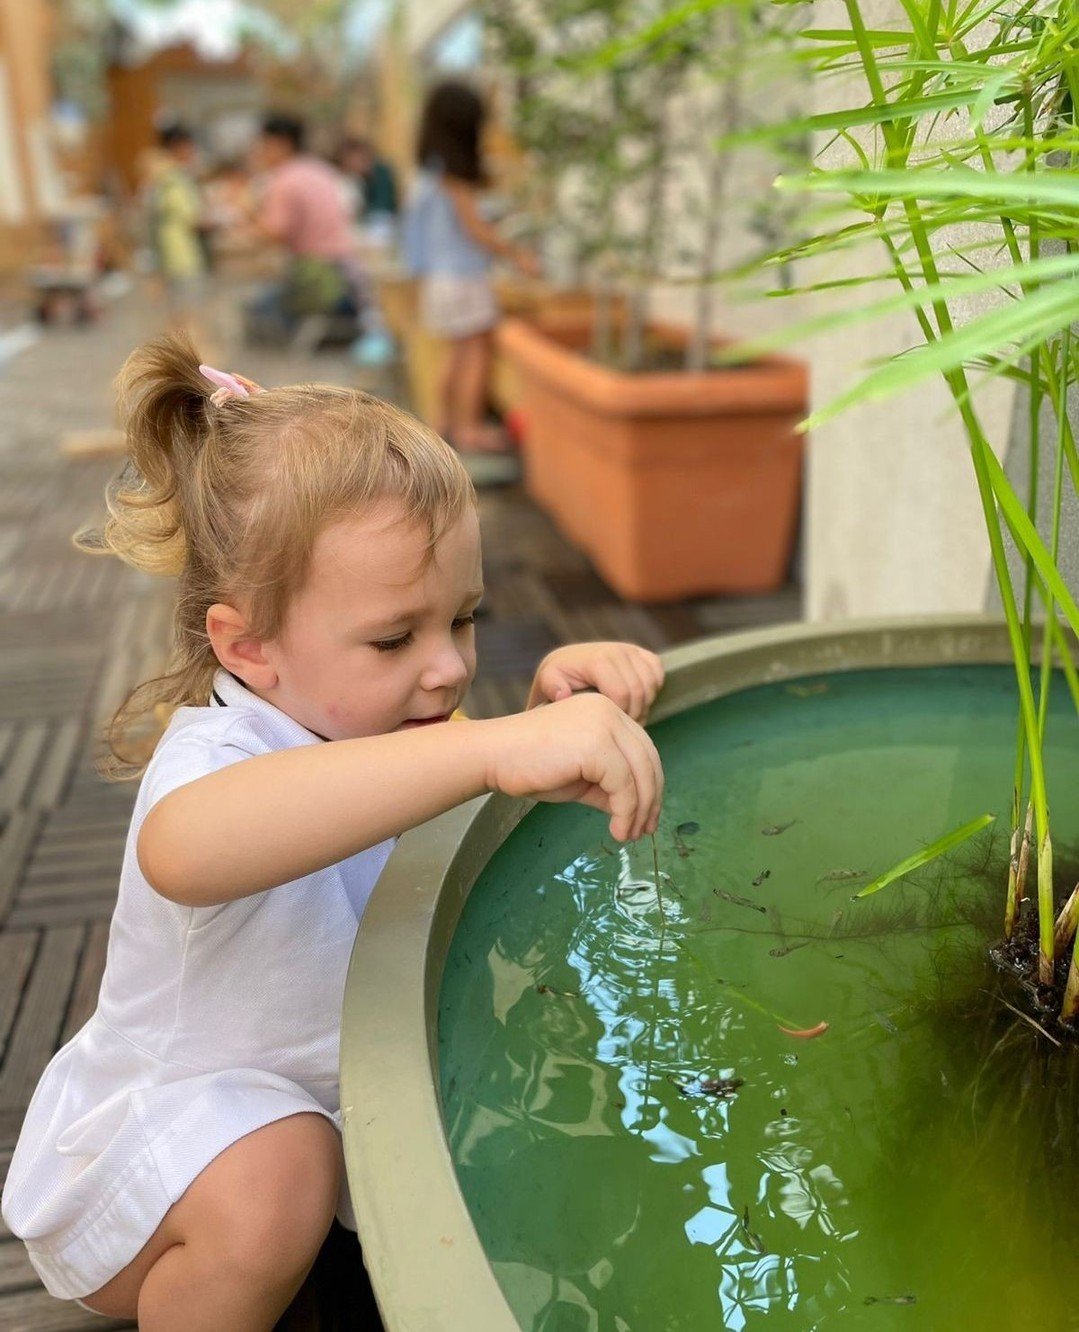 Drawing circles in the water to play with our fishy friends! They have multiplied and multiplied and now we have lots of little babies to observe too.⁠
⁠
⁠
#inspirephilosophy#learningthroughplay #playbasedlearning  #econursery #jumeirah #dubaitag #du